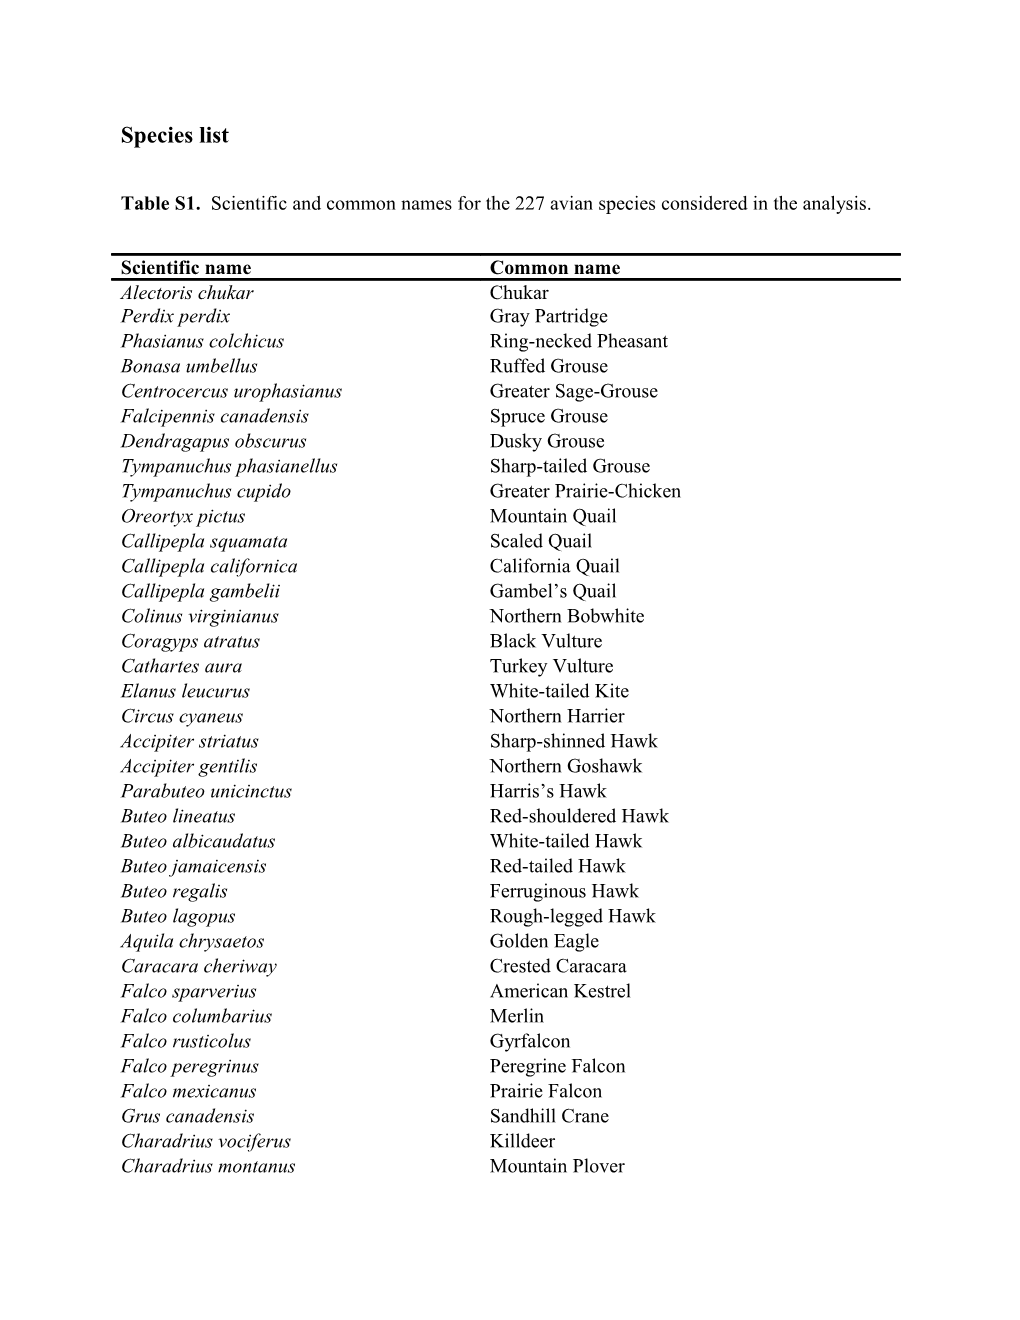 Table S1. Scientific and Common Names for the 227 Avian Species Considered in the Analysis